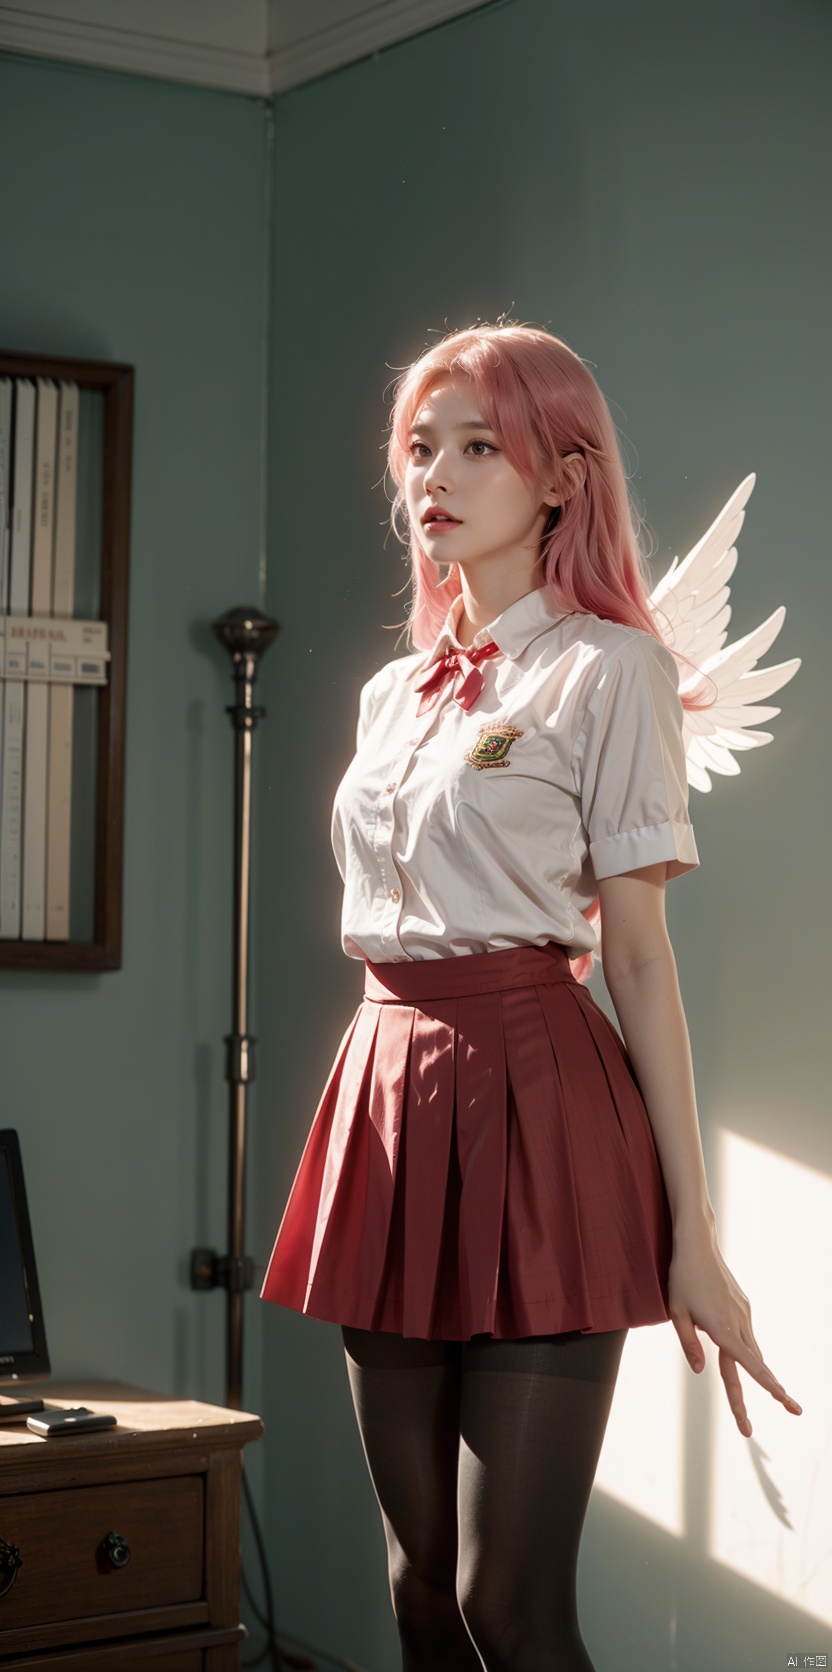  Reality, official art, uniform 8k quality, super detail, fine detail skin, movie angle, movie texture, movie lighting, masterpiece, best picture quality, deep shadows, backlight, silhouette, light, school uniform, pleated skirt, living room, 1 girl, vermilion lips, messy hair, 1 girl, mini skirt, pink hair, showy underwear, huge chest, bj_ Devil_ Angel, Tiffany Lockhart, Serafuku, head up, looking at the audience, with skirts, long legs, standing opposite the audience, looking up from an angle,tutuwl,cyborg,black pantyhose